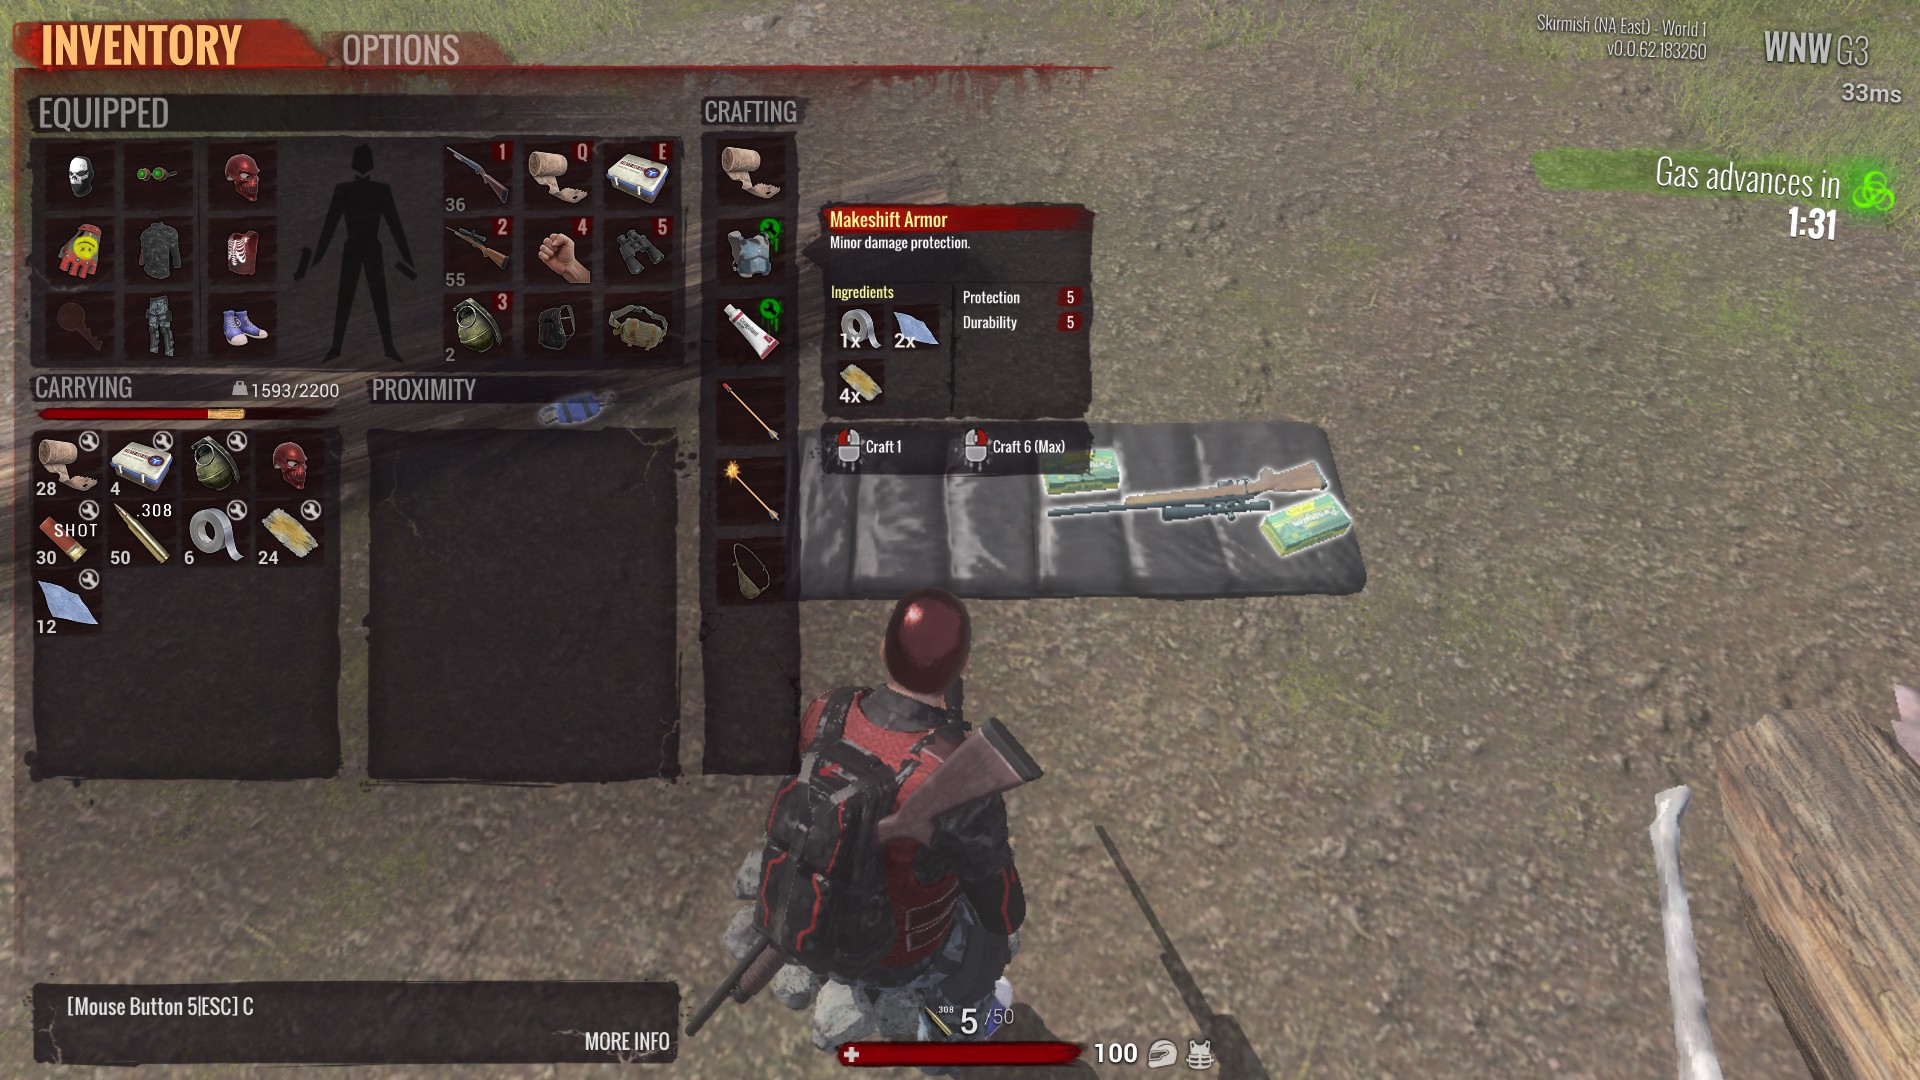 H1Z1 inventory and crafting screen